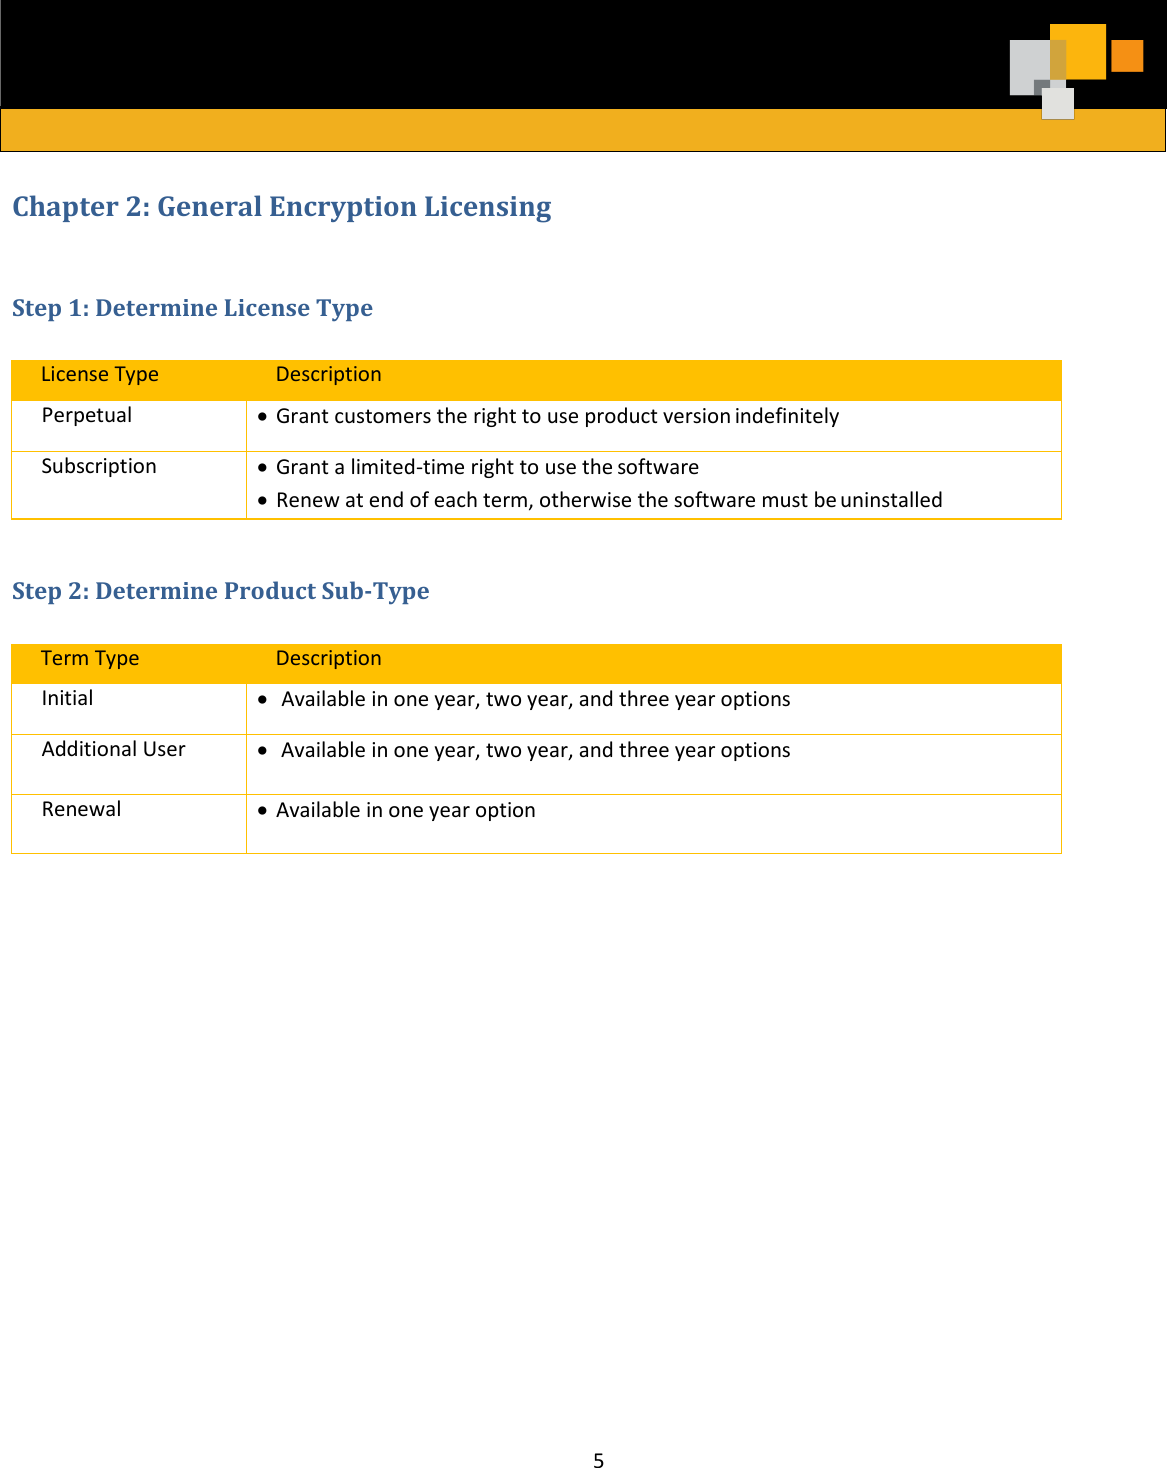 Page 5 of 12 - Encryption-licensing-guide